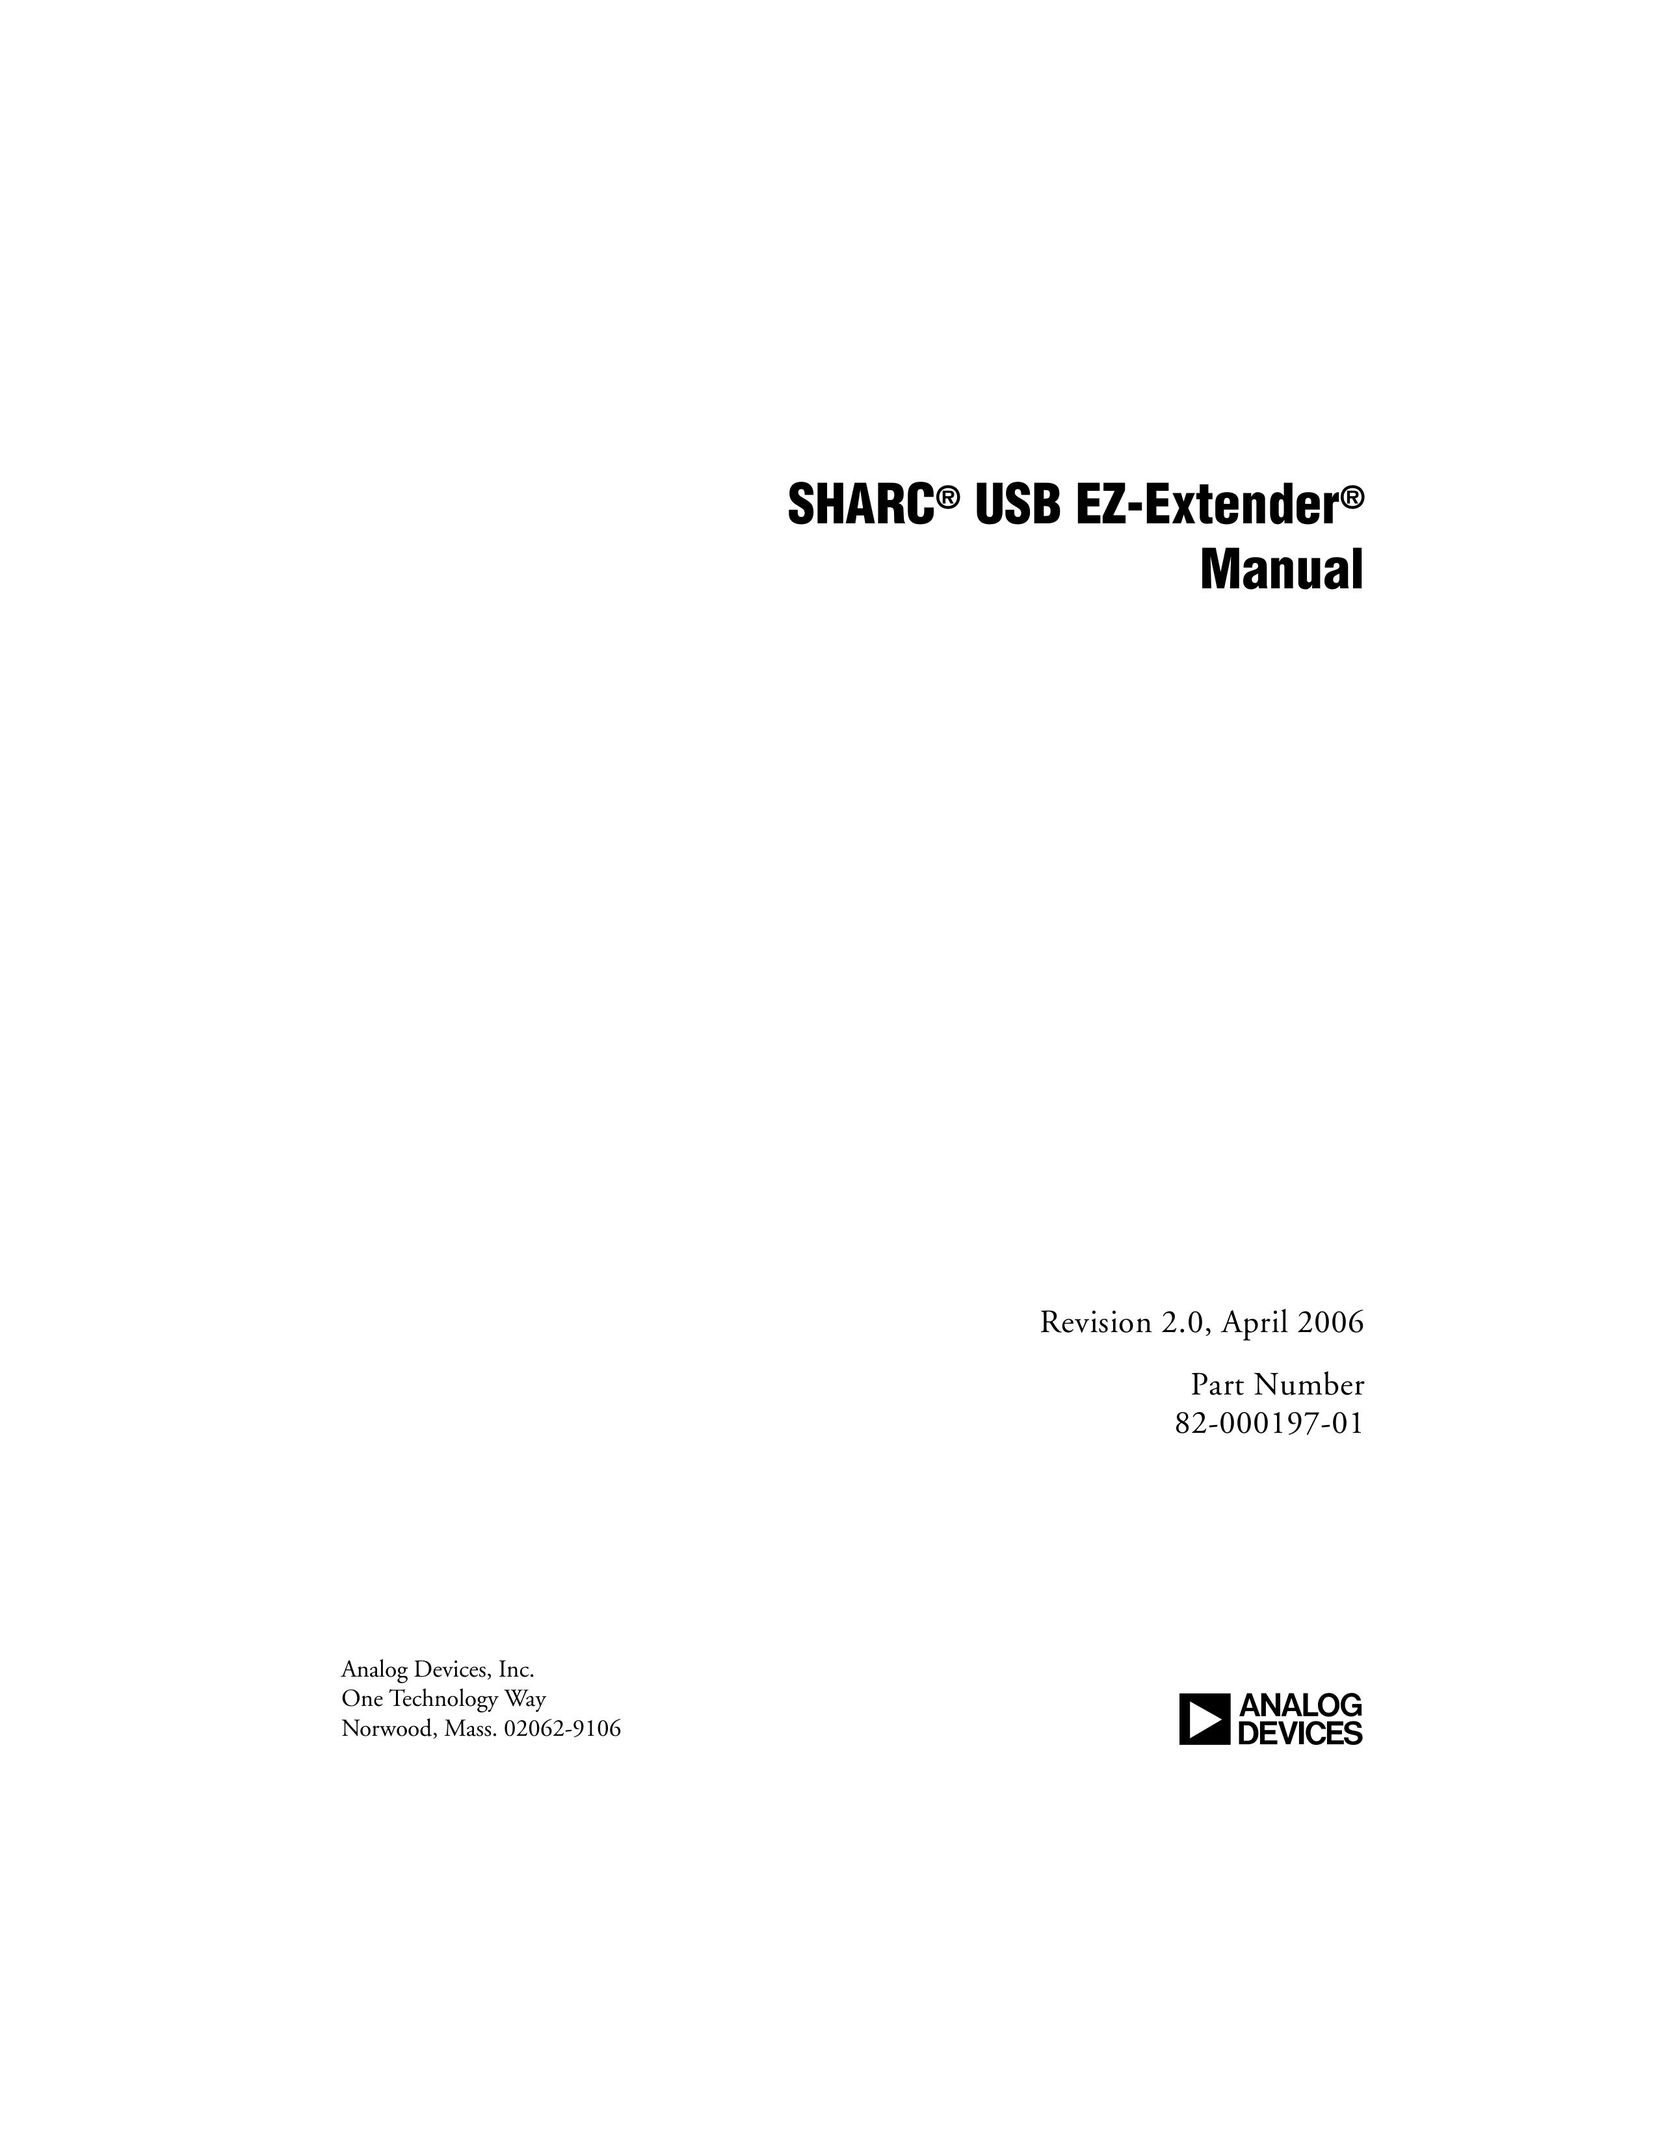 Analog Devices EZ-Extender Network Card User Manual